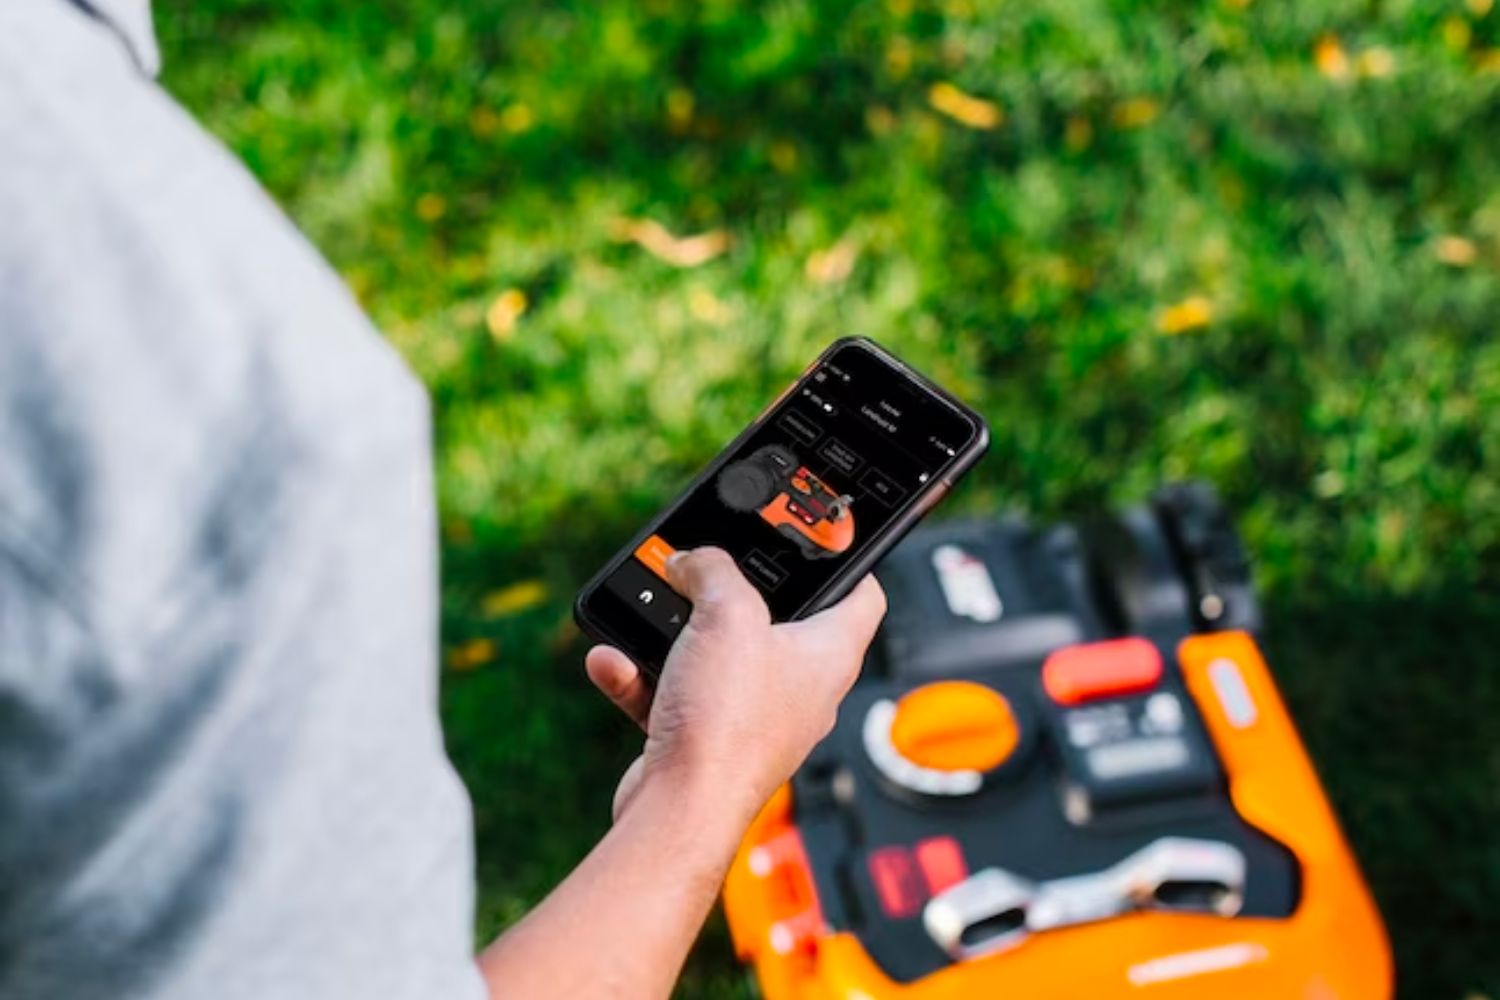 A person using the Worx app to control the Worx Landroid M robotic lawn mower